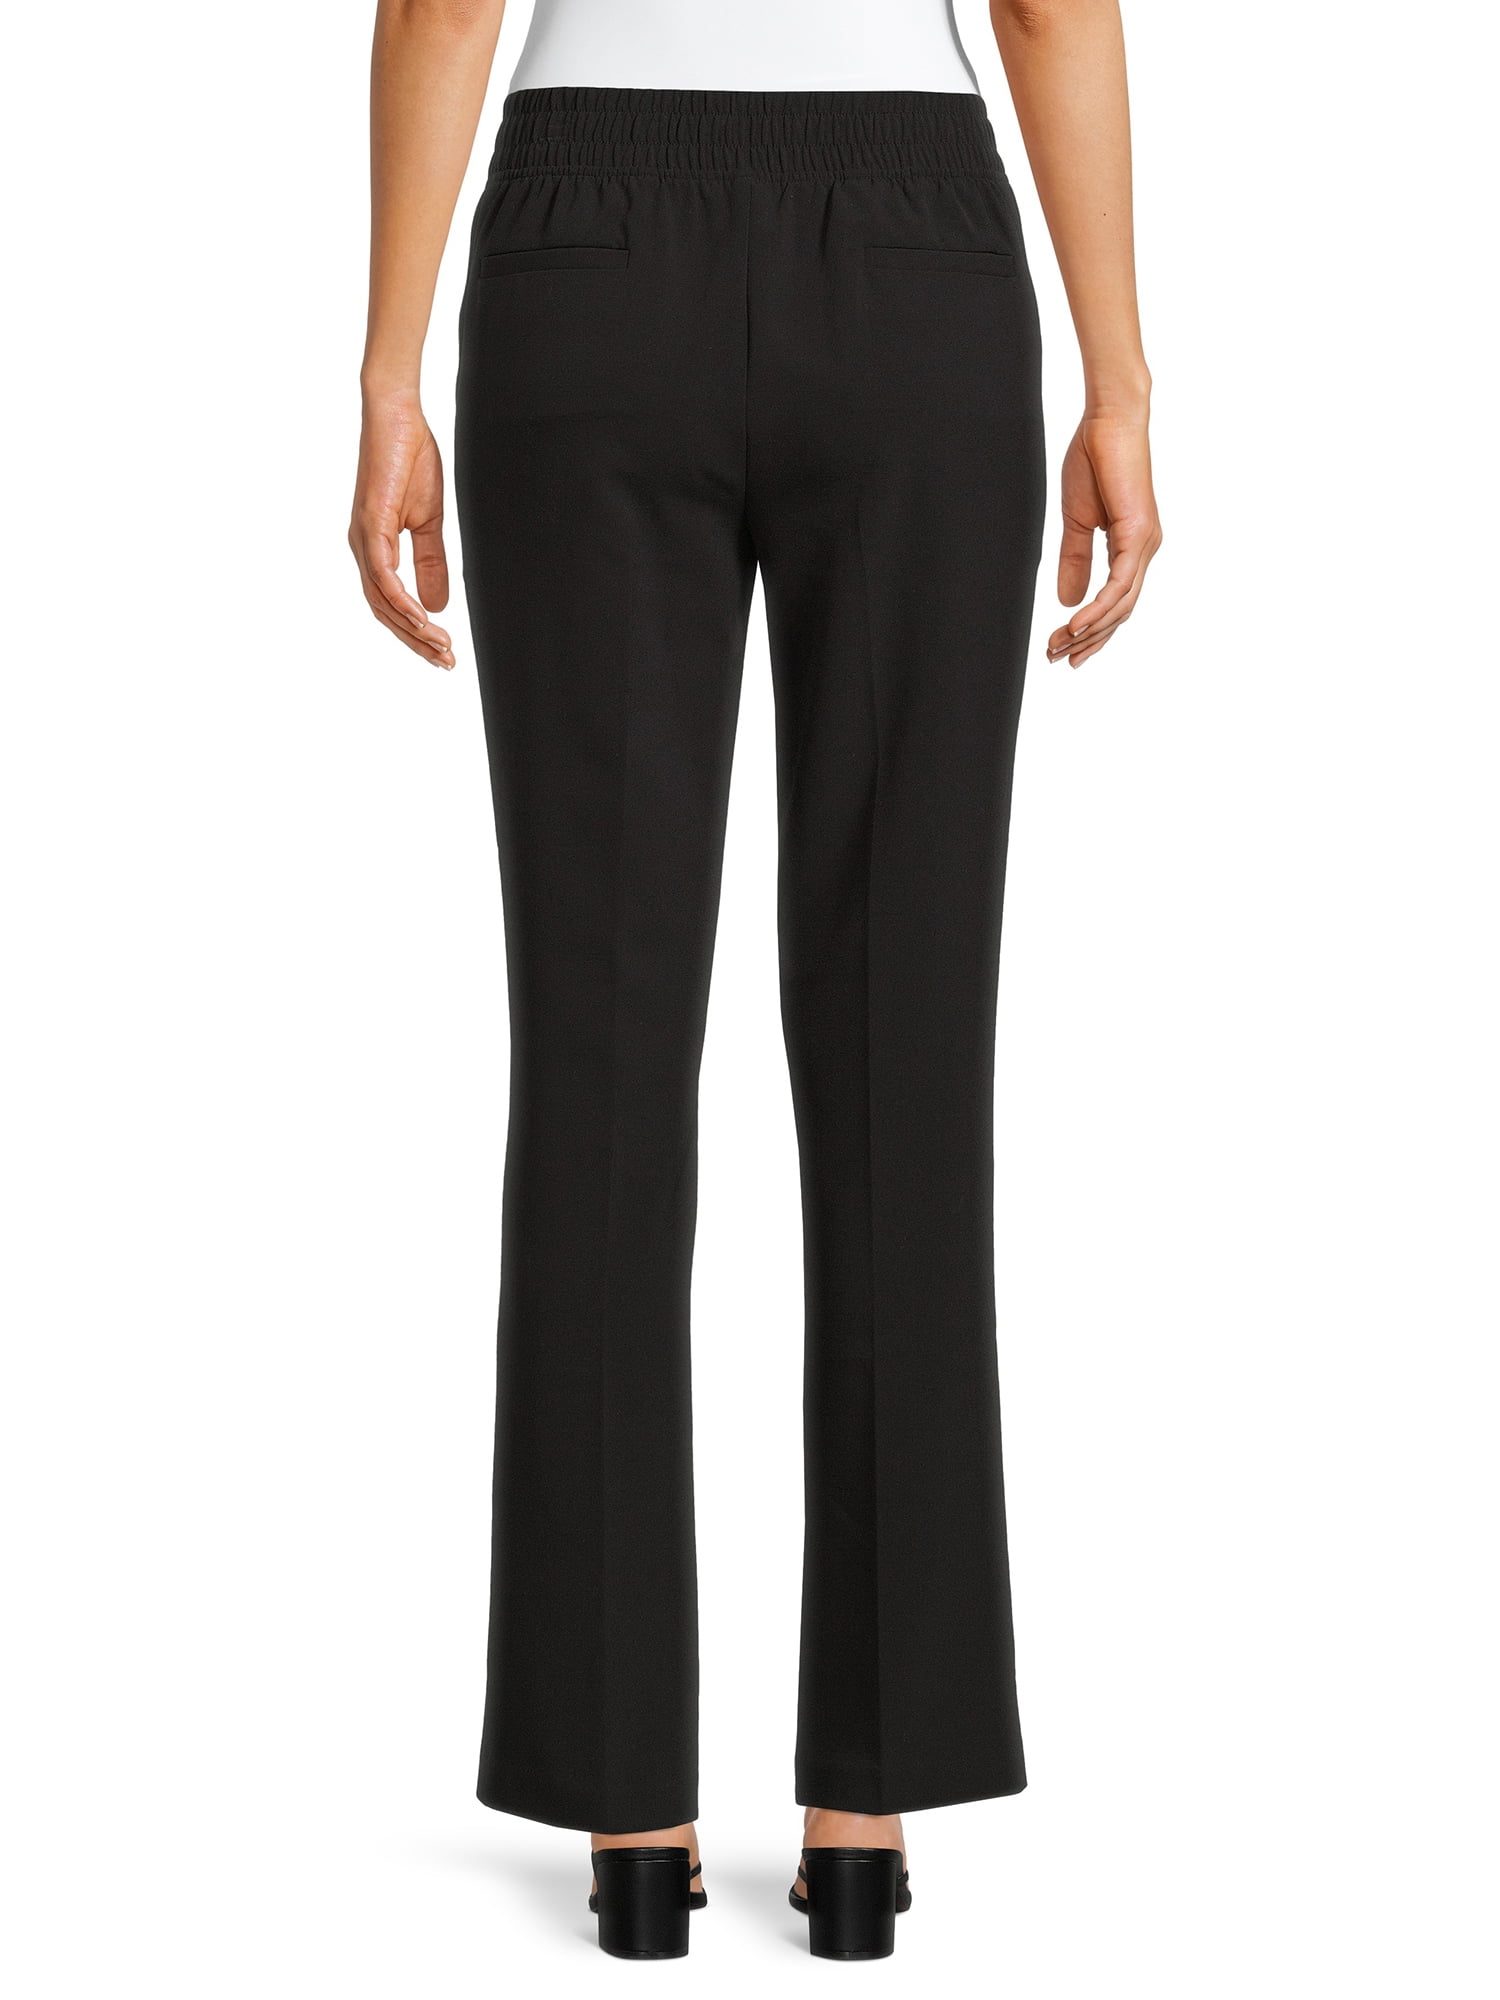 Ginasy Dress Pants for Women Business Casual Stretch India | Ubuy